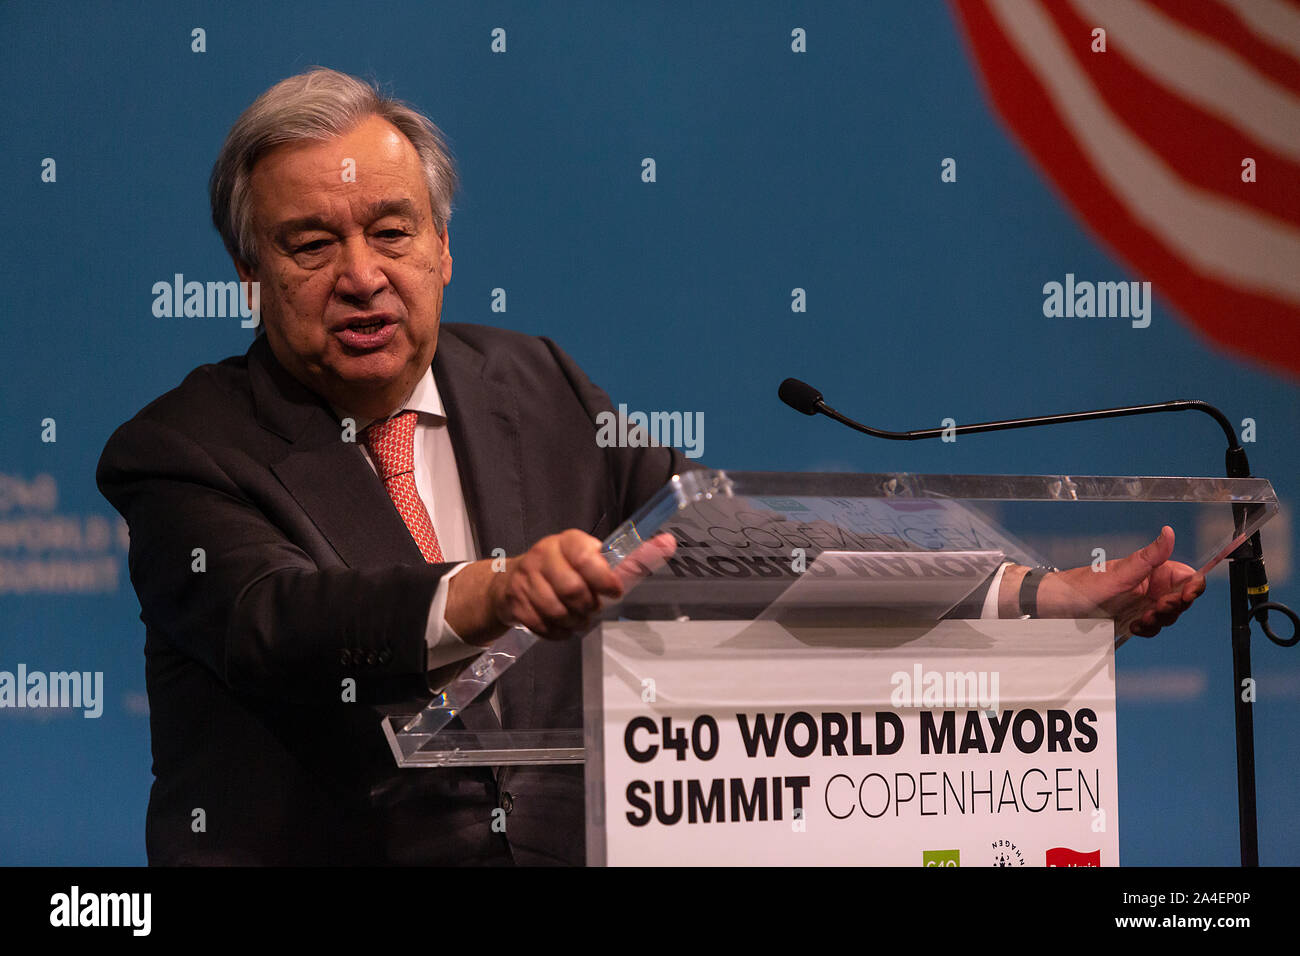 COPENHAGEN, DENMARK – OCTOBER 10. DENMARK: UN Secretary-General Antonio Guterres speaks during a press conference at the C40 World Mayors Summit on October 10, 2019 in Copenhagen, Denmark. The Secretary-General will also meet the Danish Queen Margrethe and the Prime Minister, Mette Frederiksen. More than 90 mayors of some of the world’s largest and most influential cities representing some 700 million people meet in Copenhagen from October 9-12 for the C40 World Mayors Summit. The purpose with the Summit in Copenhagen is to build a global coalition of leading cities, businesses and citizens th Stock Photo